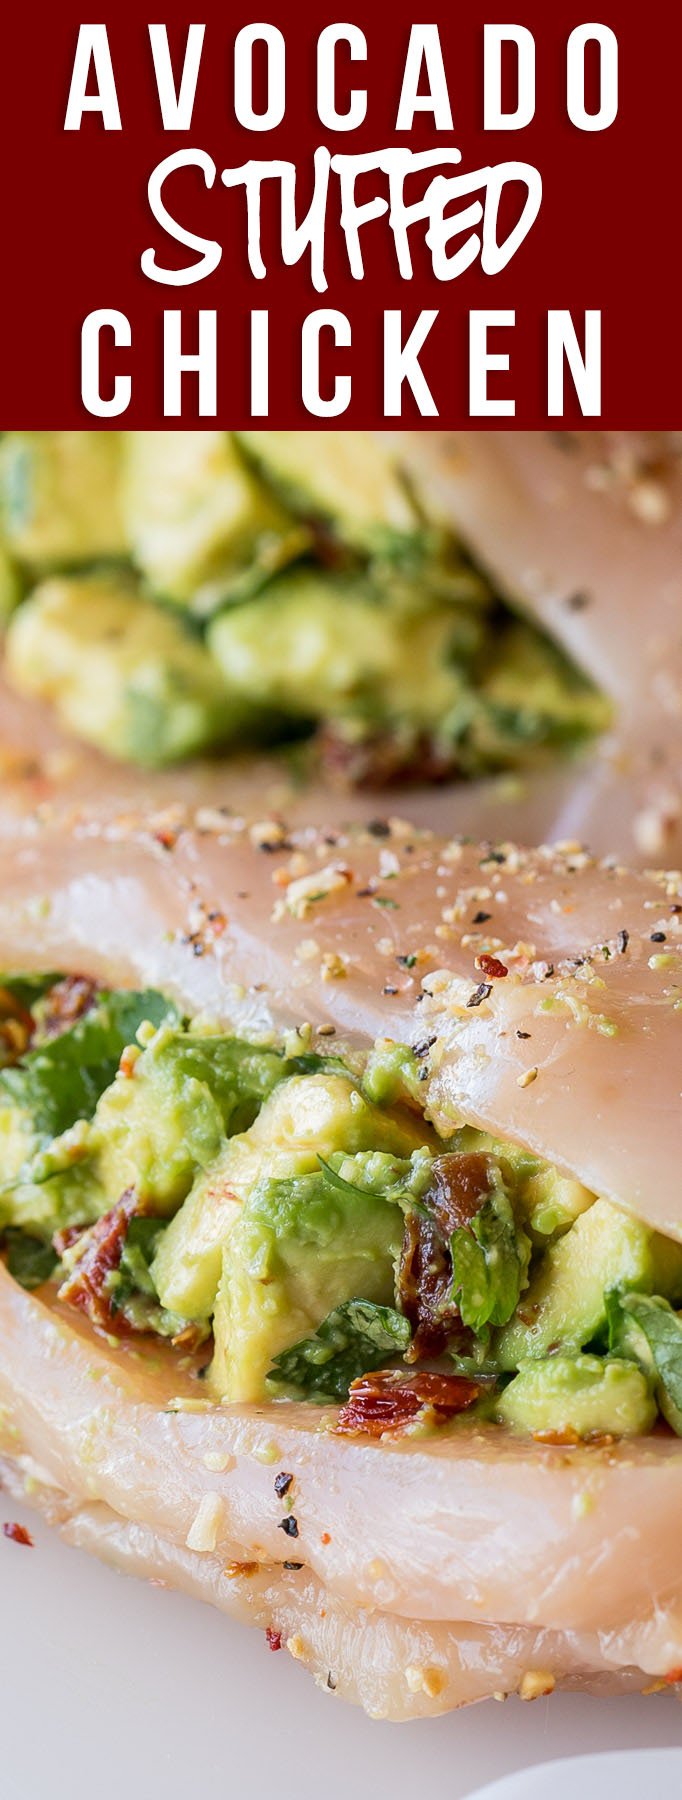 WINNER! My whole family LOVED these Avocado Stuffed Chicken Breasts! Super easy filling and the chicken was moist and delicious! Definitely a new family favorite chicken dinner recipe!